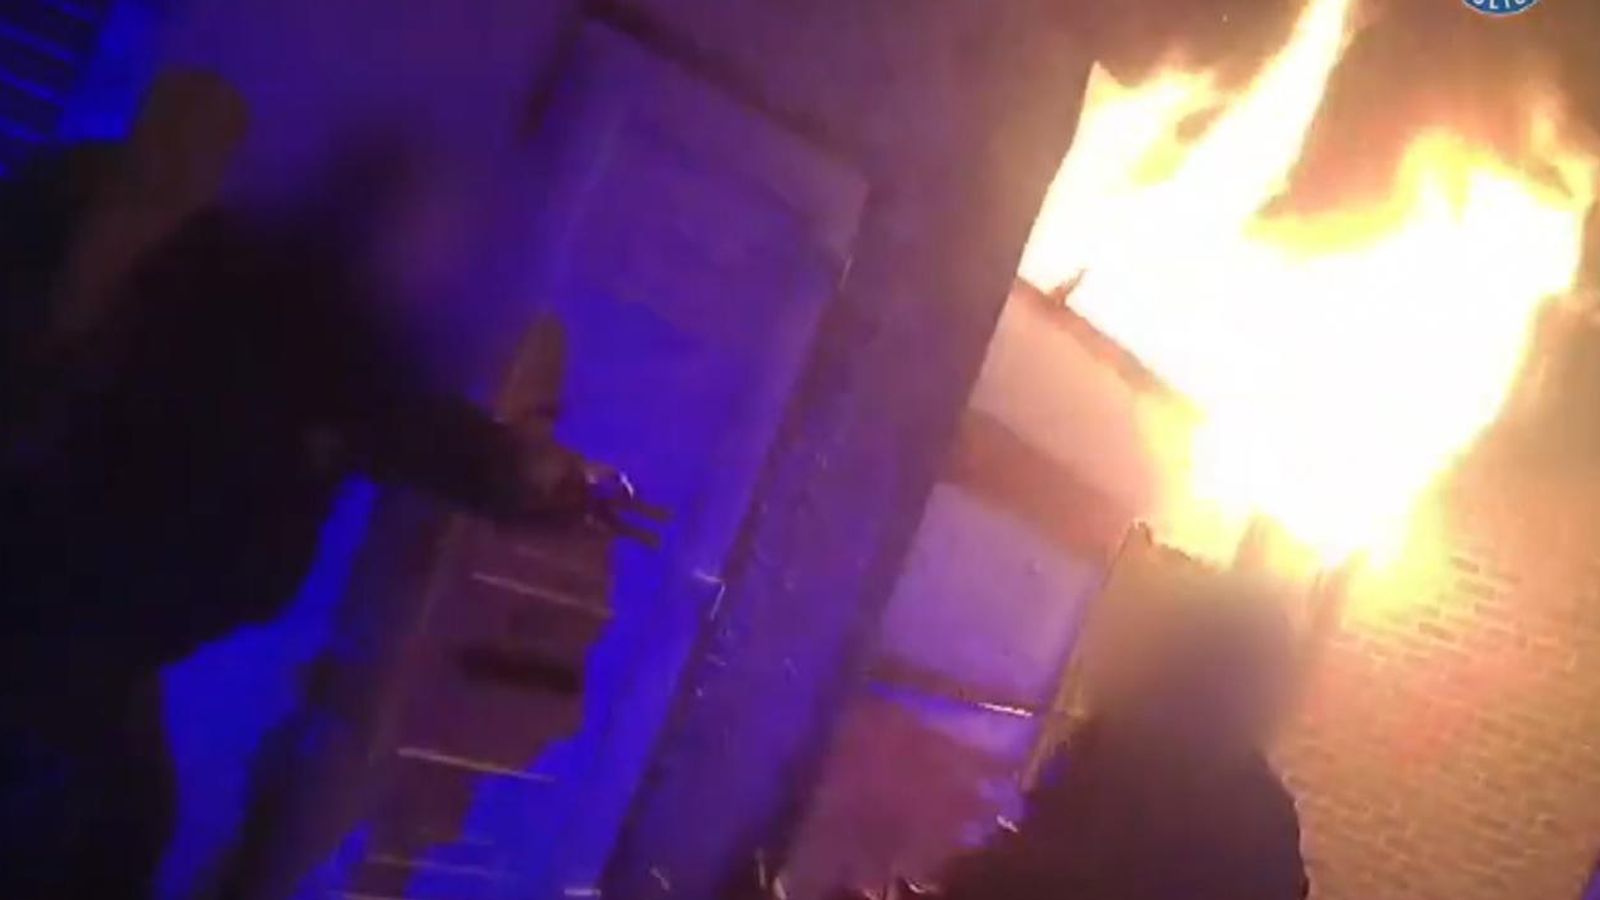 Dramatic bodycam video: Two rescued after suspected arson attack in Birmingham